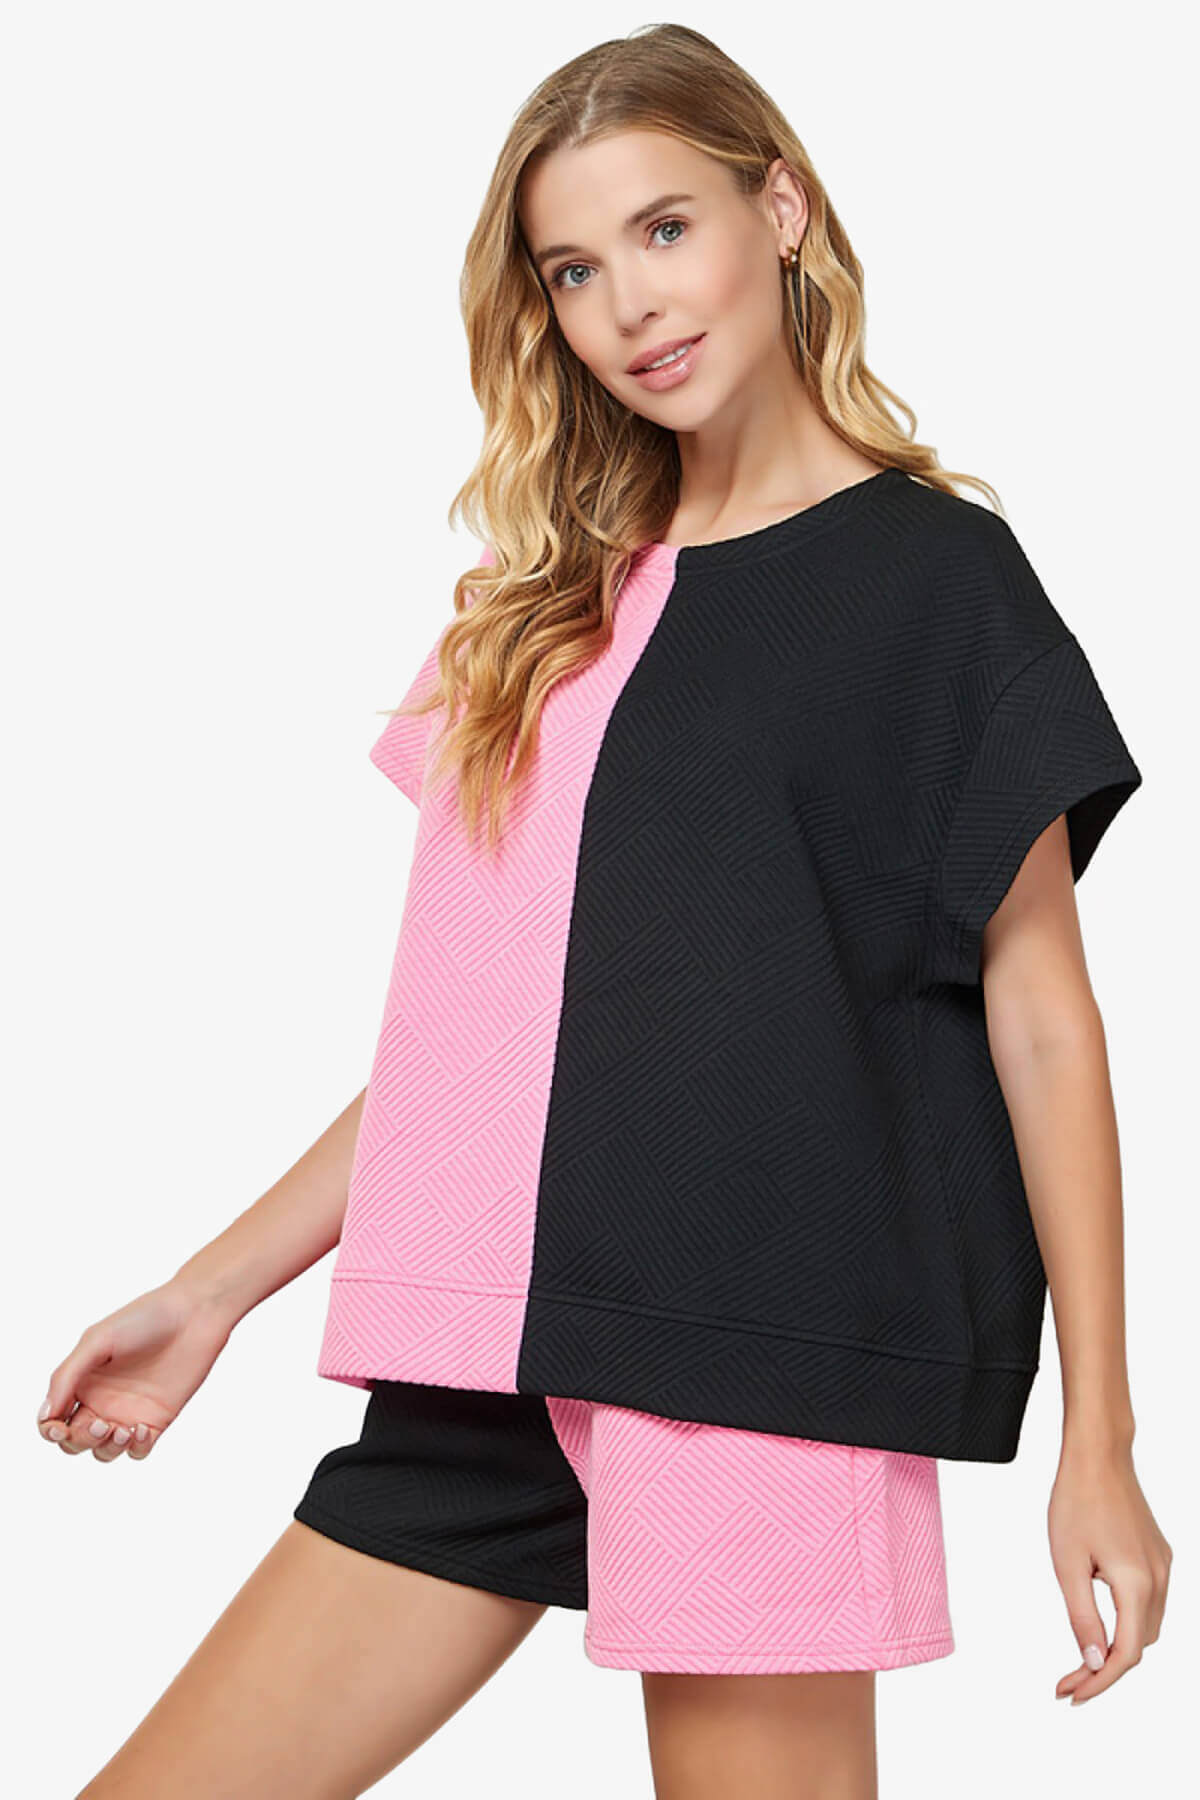 Lassy Textured Colorblock Short Sleeve Top BLACK AND PINK_4